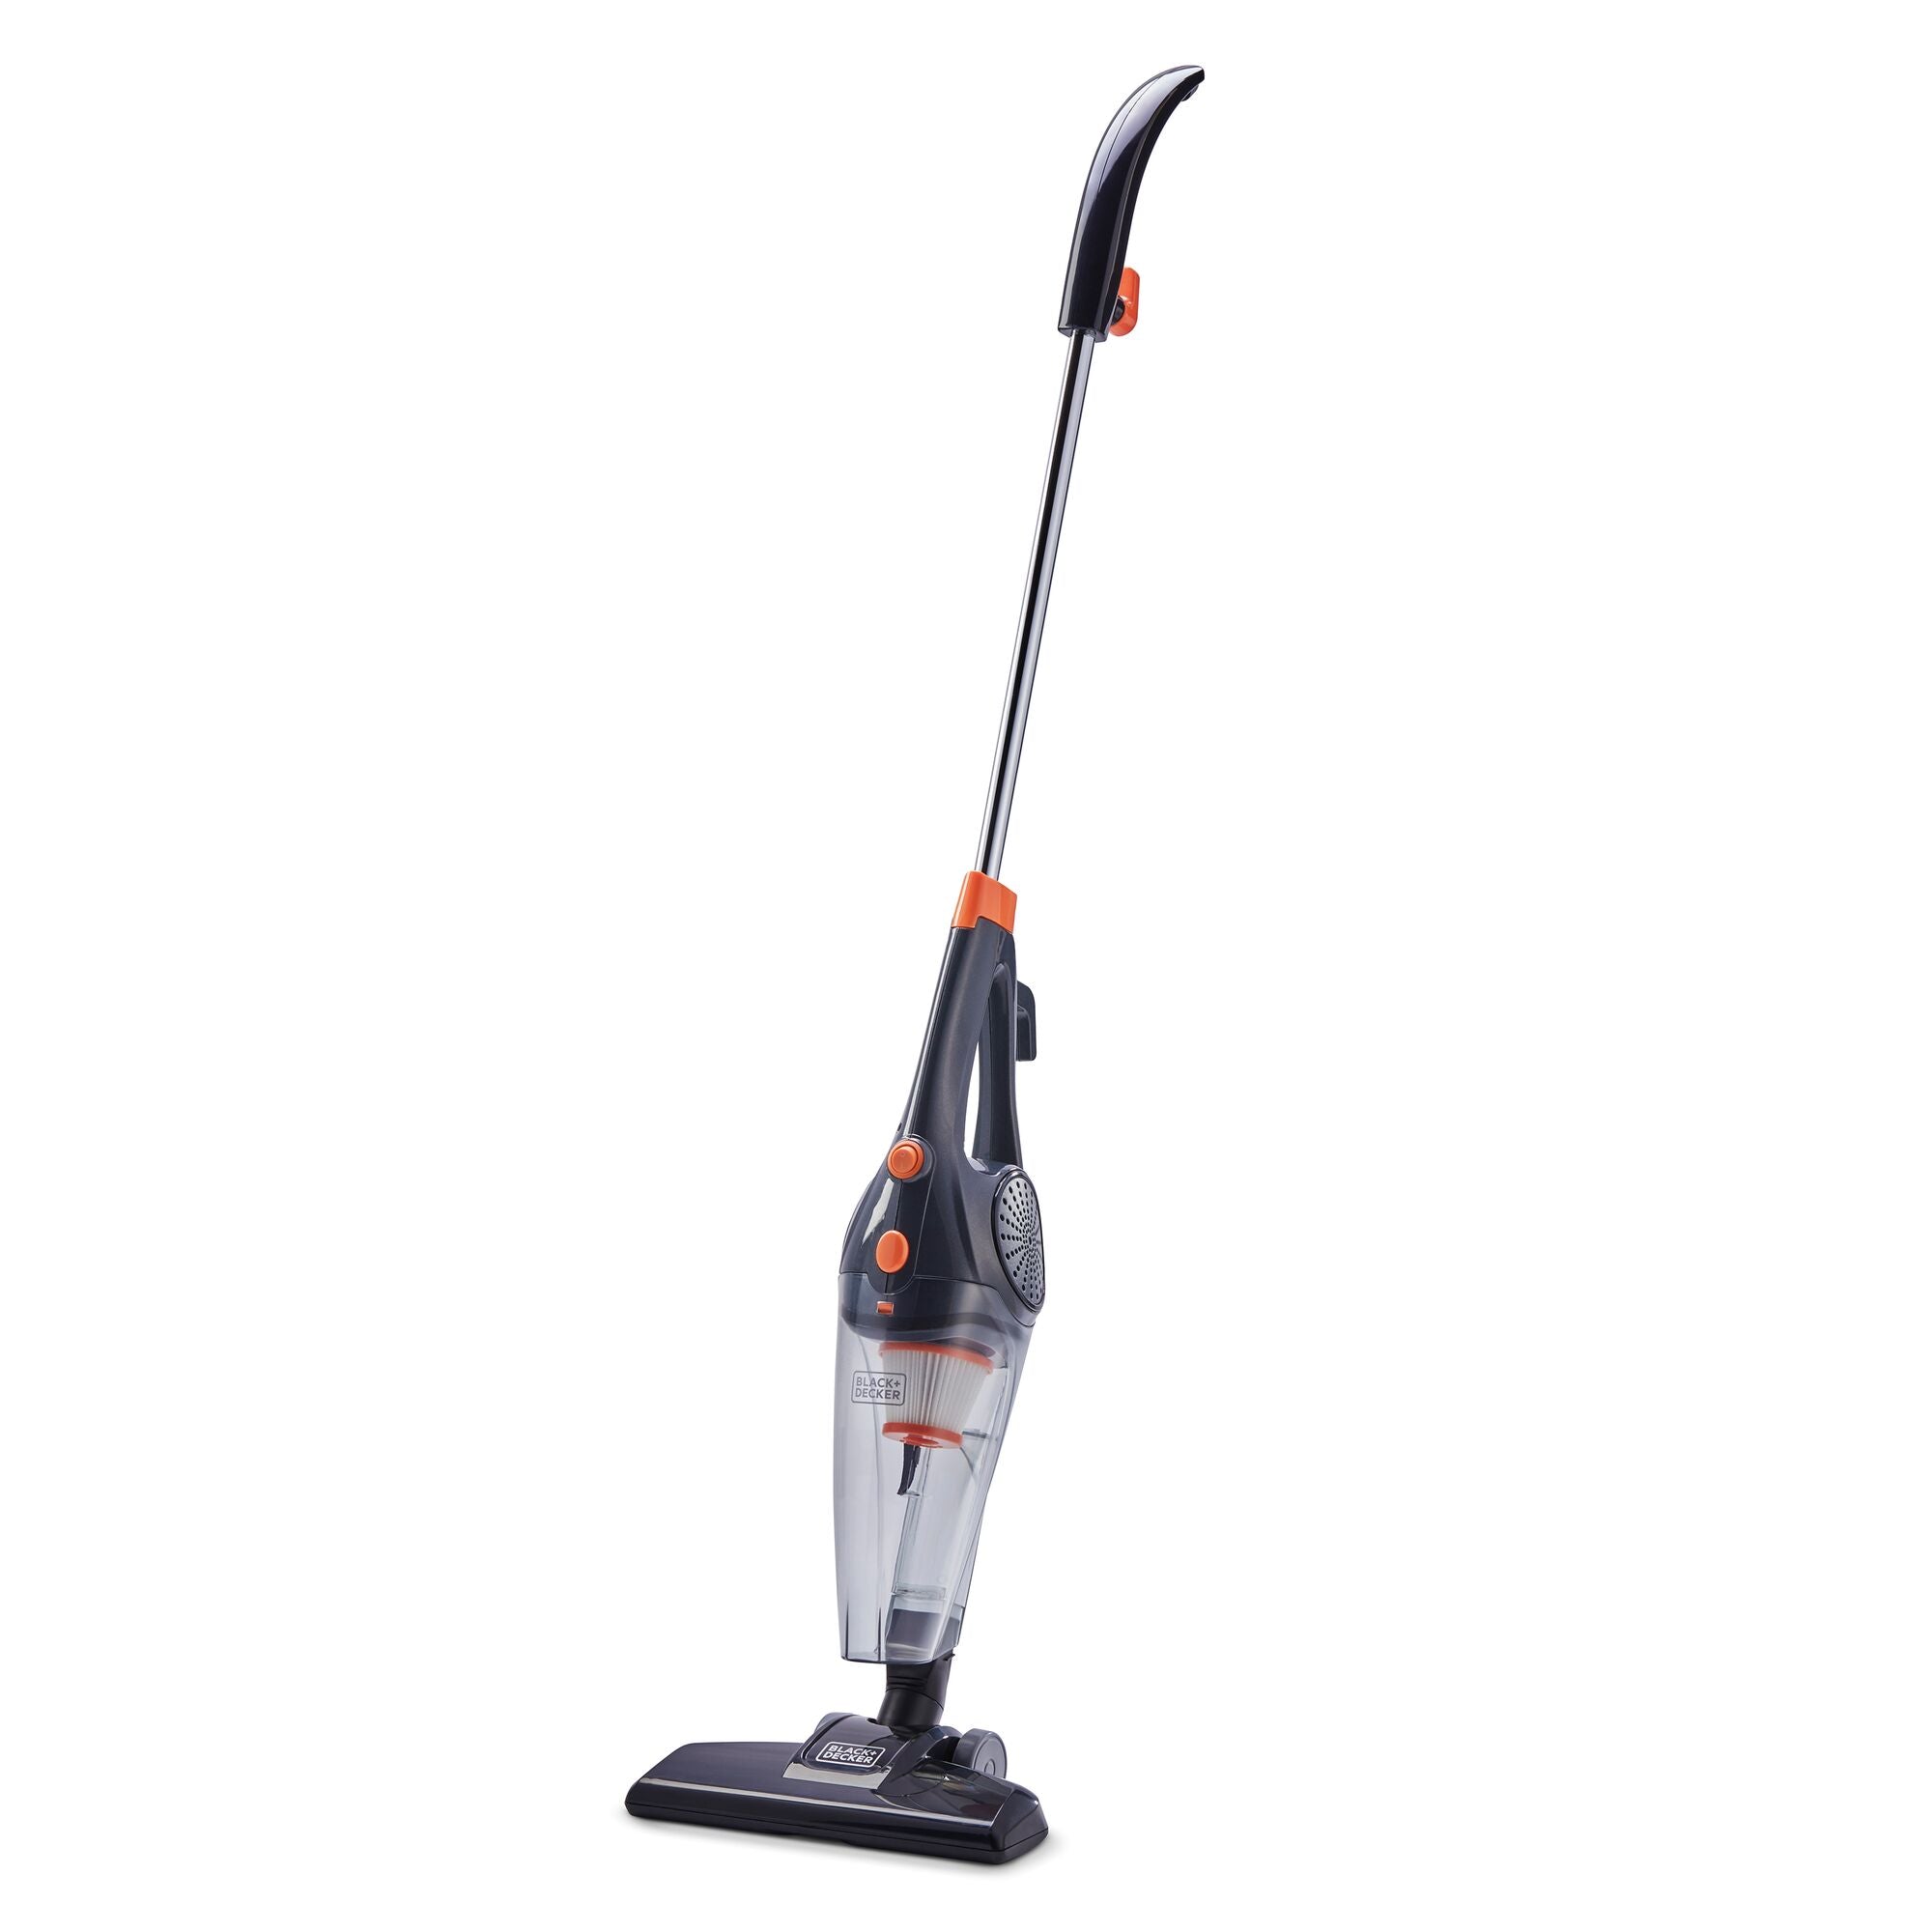 3-In-1 Upright Stick And Handheld Vacuum Cleaner